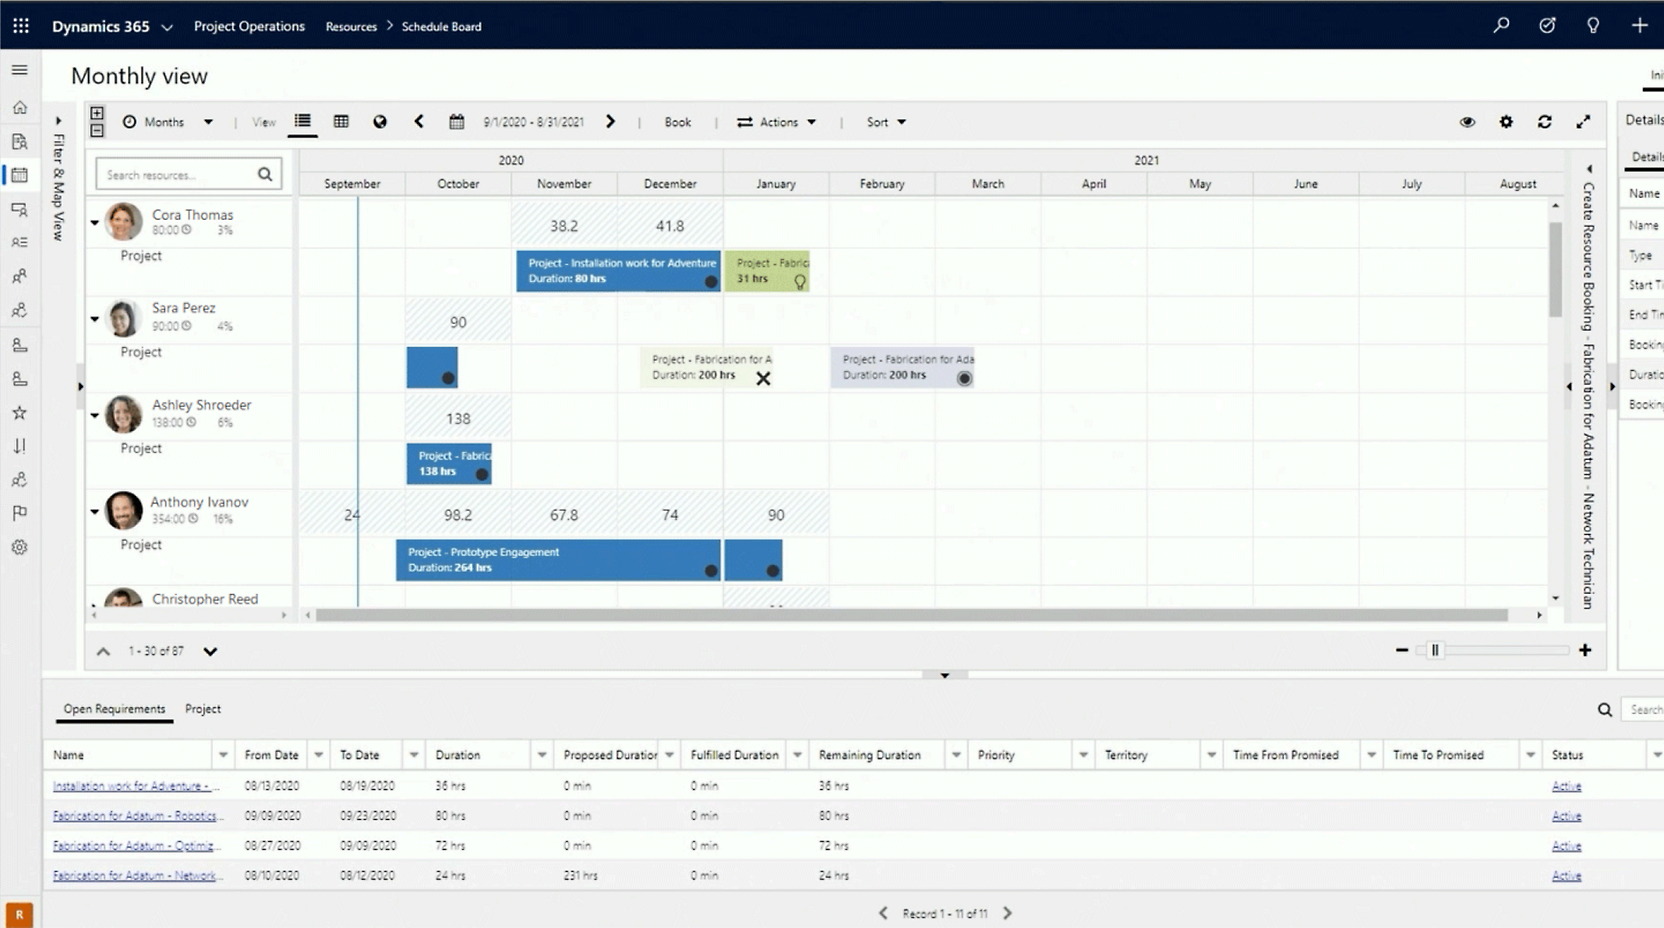 A screenshot of a computer interface showing a detailed project management software with a calendar view of tasks